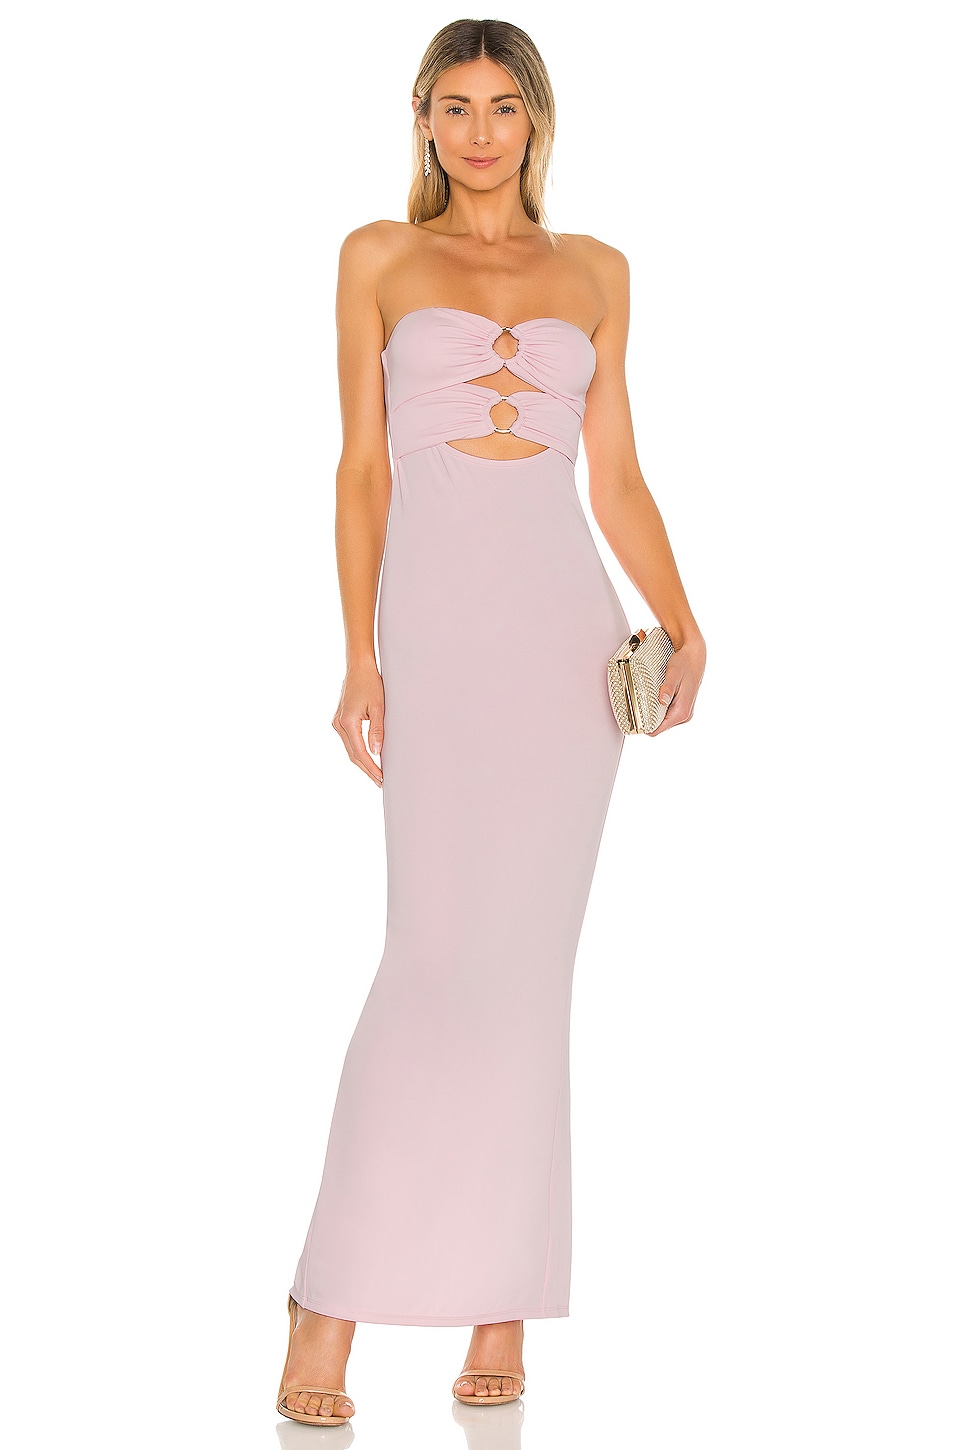 Michael Costello x REVOLVE Rylee Maxi Dress in Lilac Pink